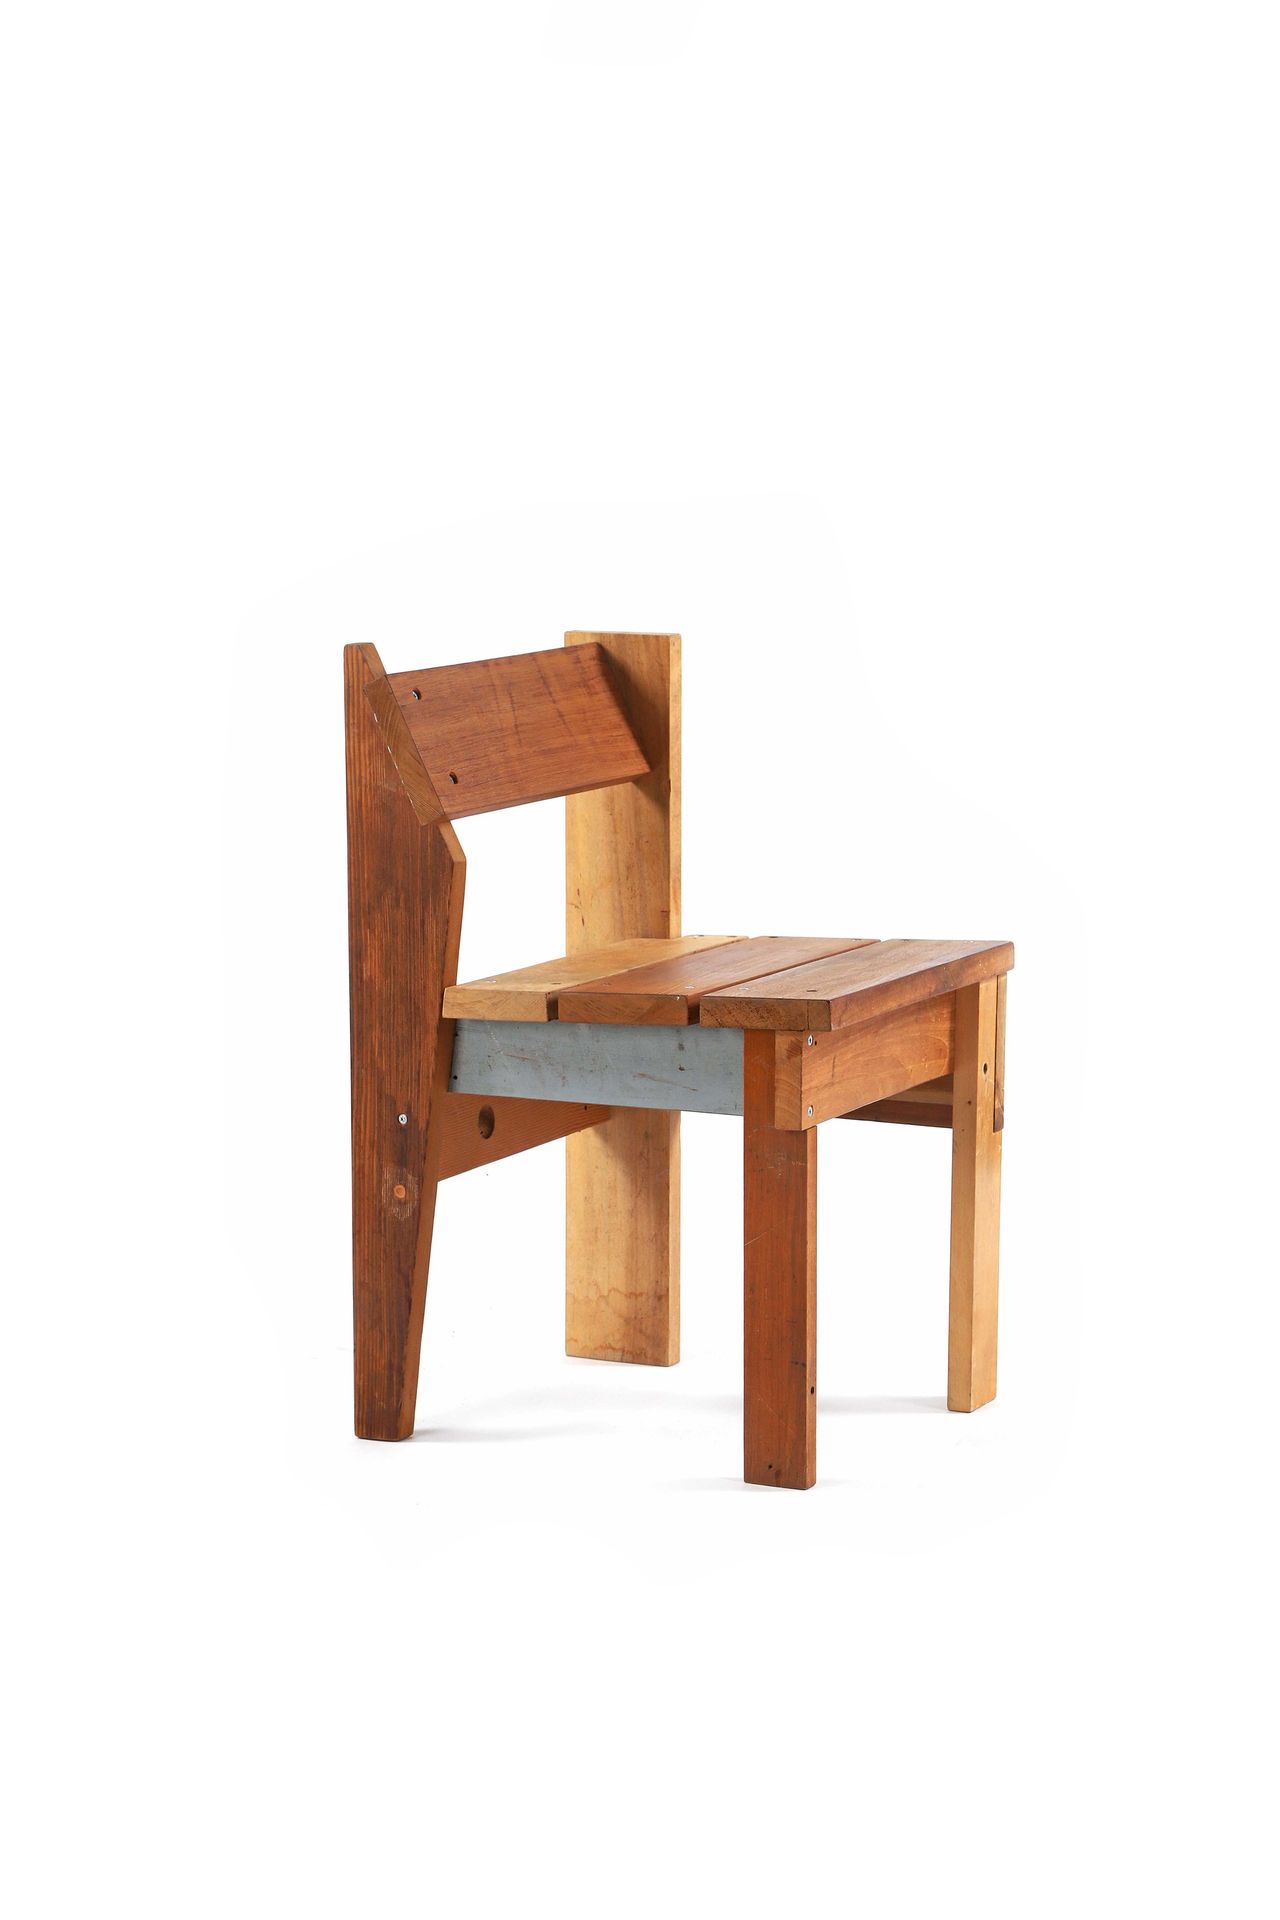 Rikkert PAAUW (1982) Chair 
wood, metal
(materials found and stored in Utrecht) &hellip;